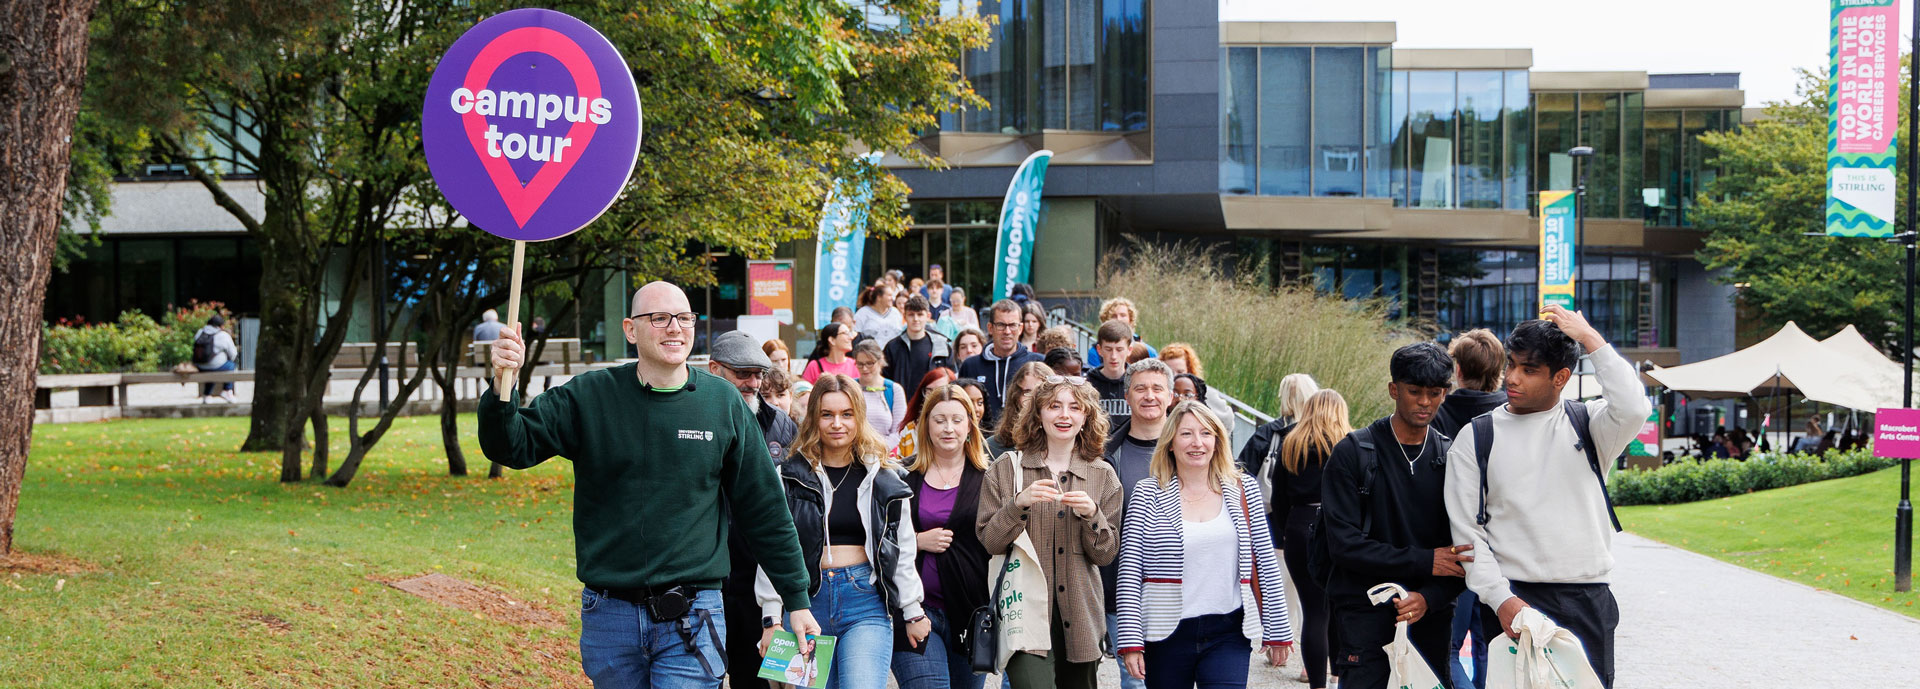 A group of happy prospective students on a campus tour at the University of Stirling